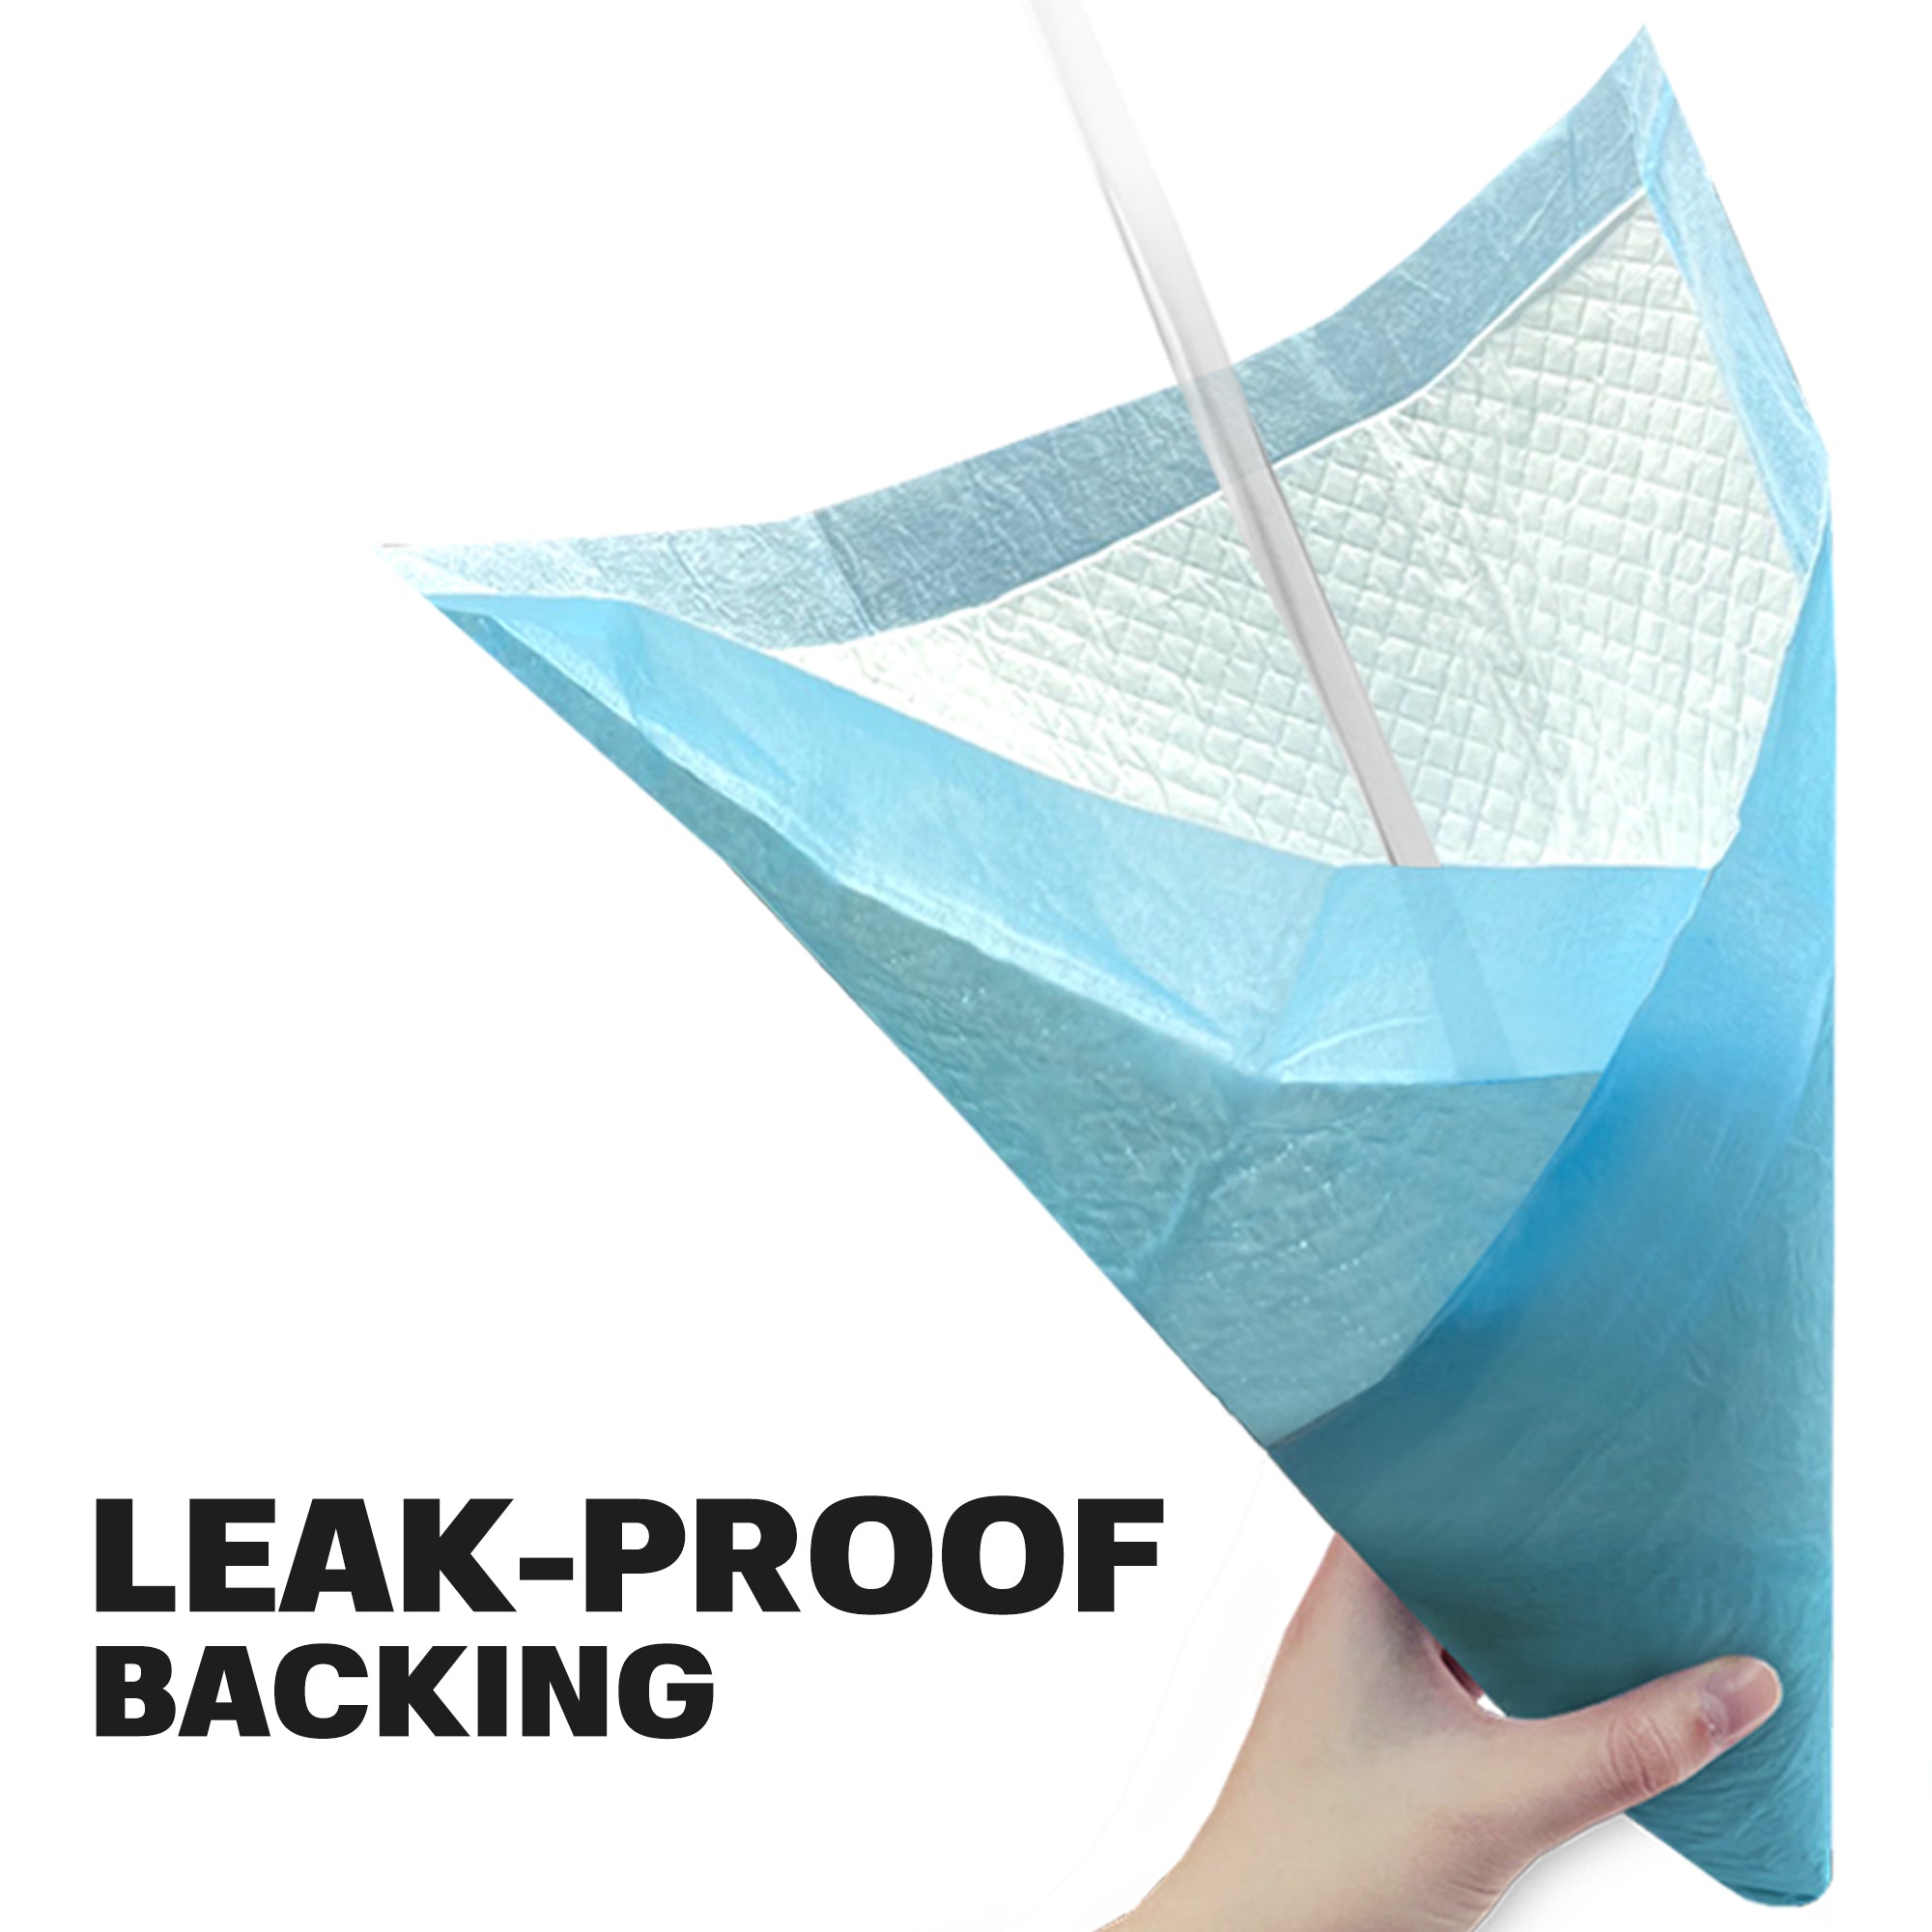 Pad includes Leak-Proof Backing